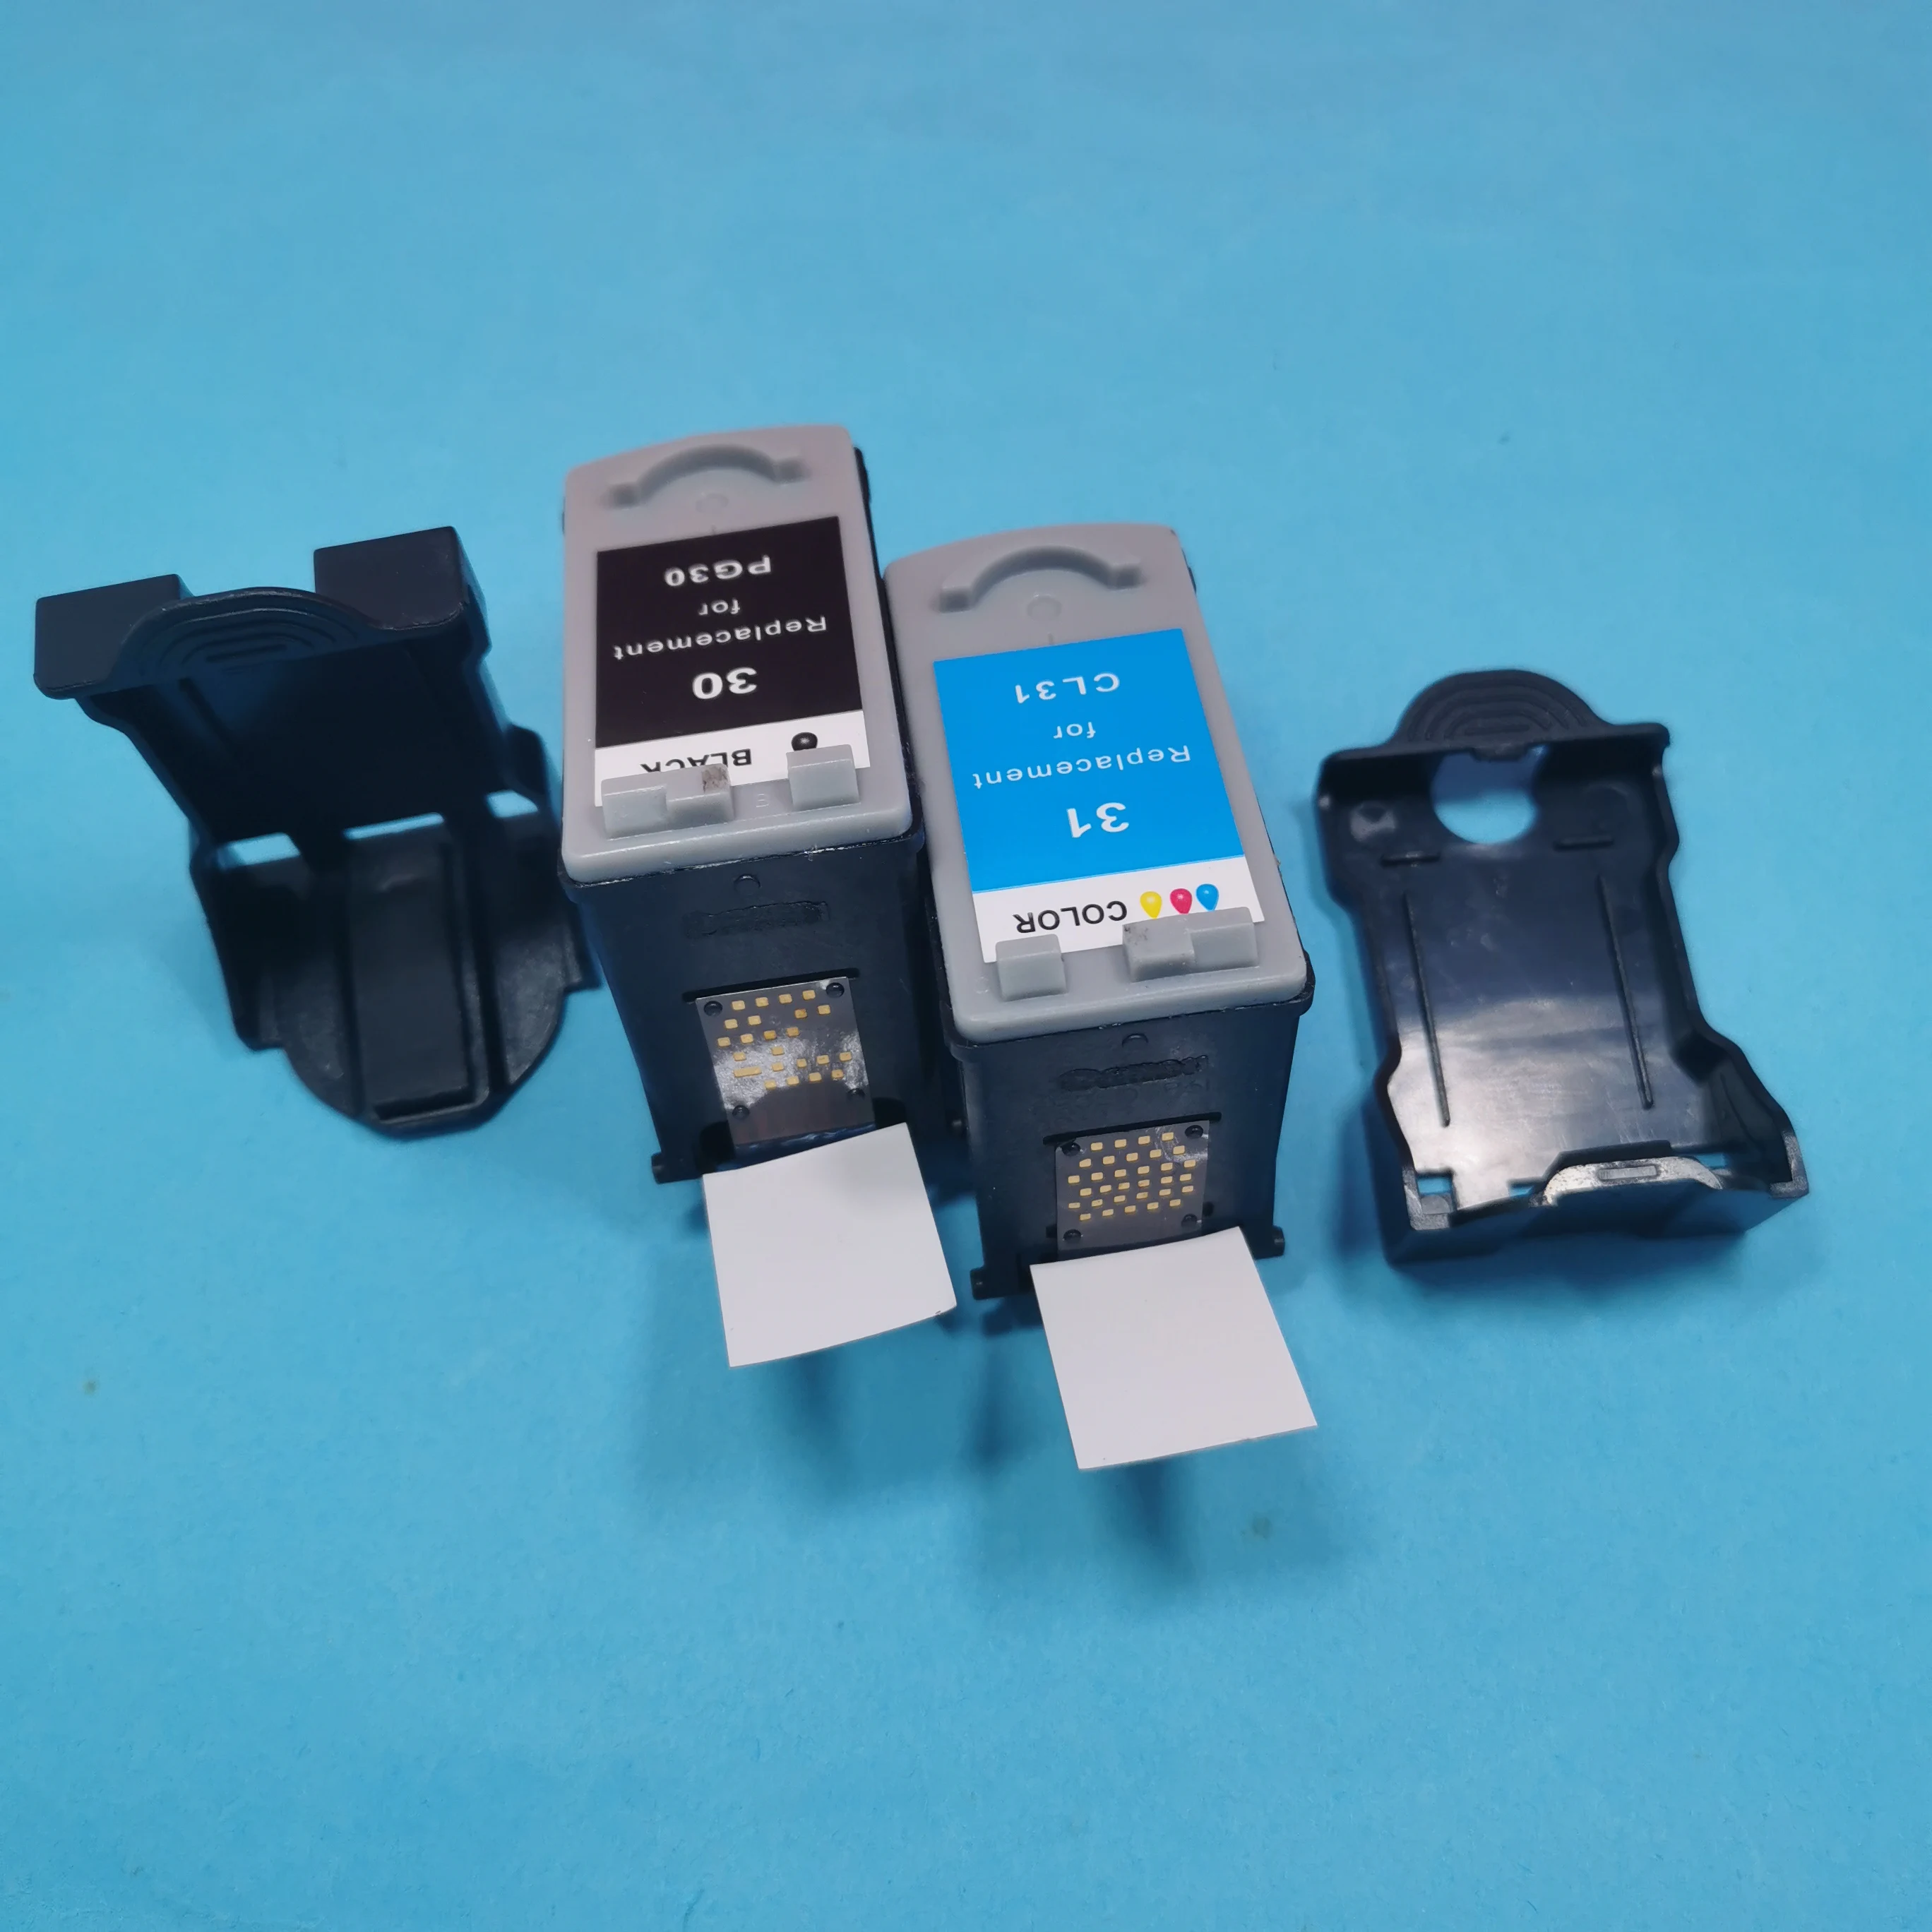 

YT PG30 CL31 Replacement ink cartridge for Canon PG-30 CL-31 for Canon Pixma iP1800 iP2600 MP 140 MP 210 MP 470 MX 300 MX 310